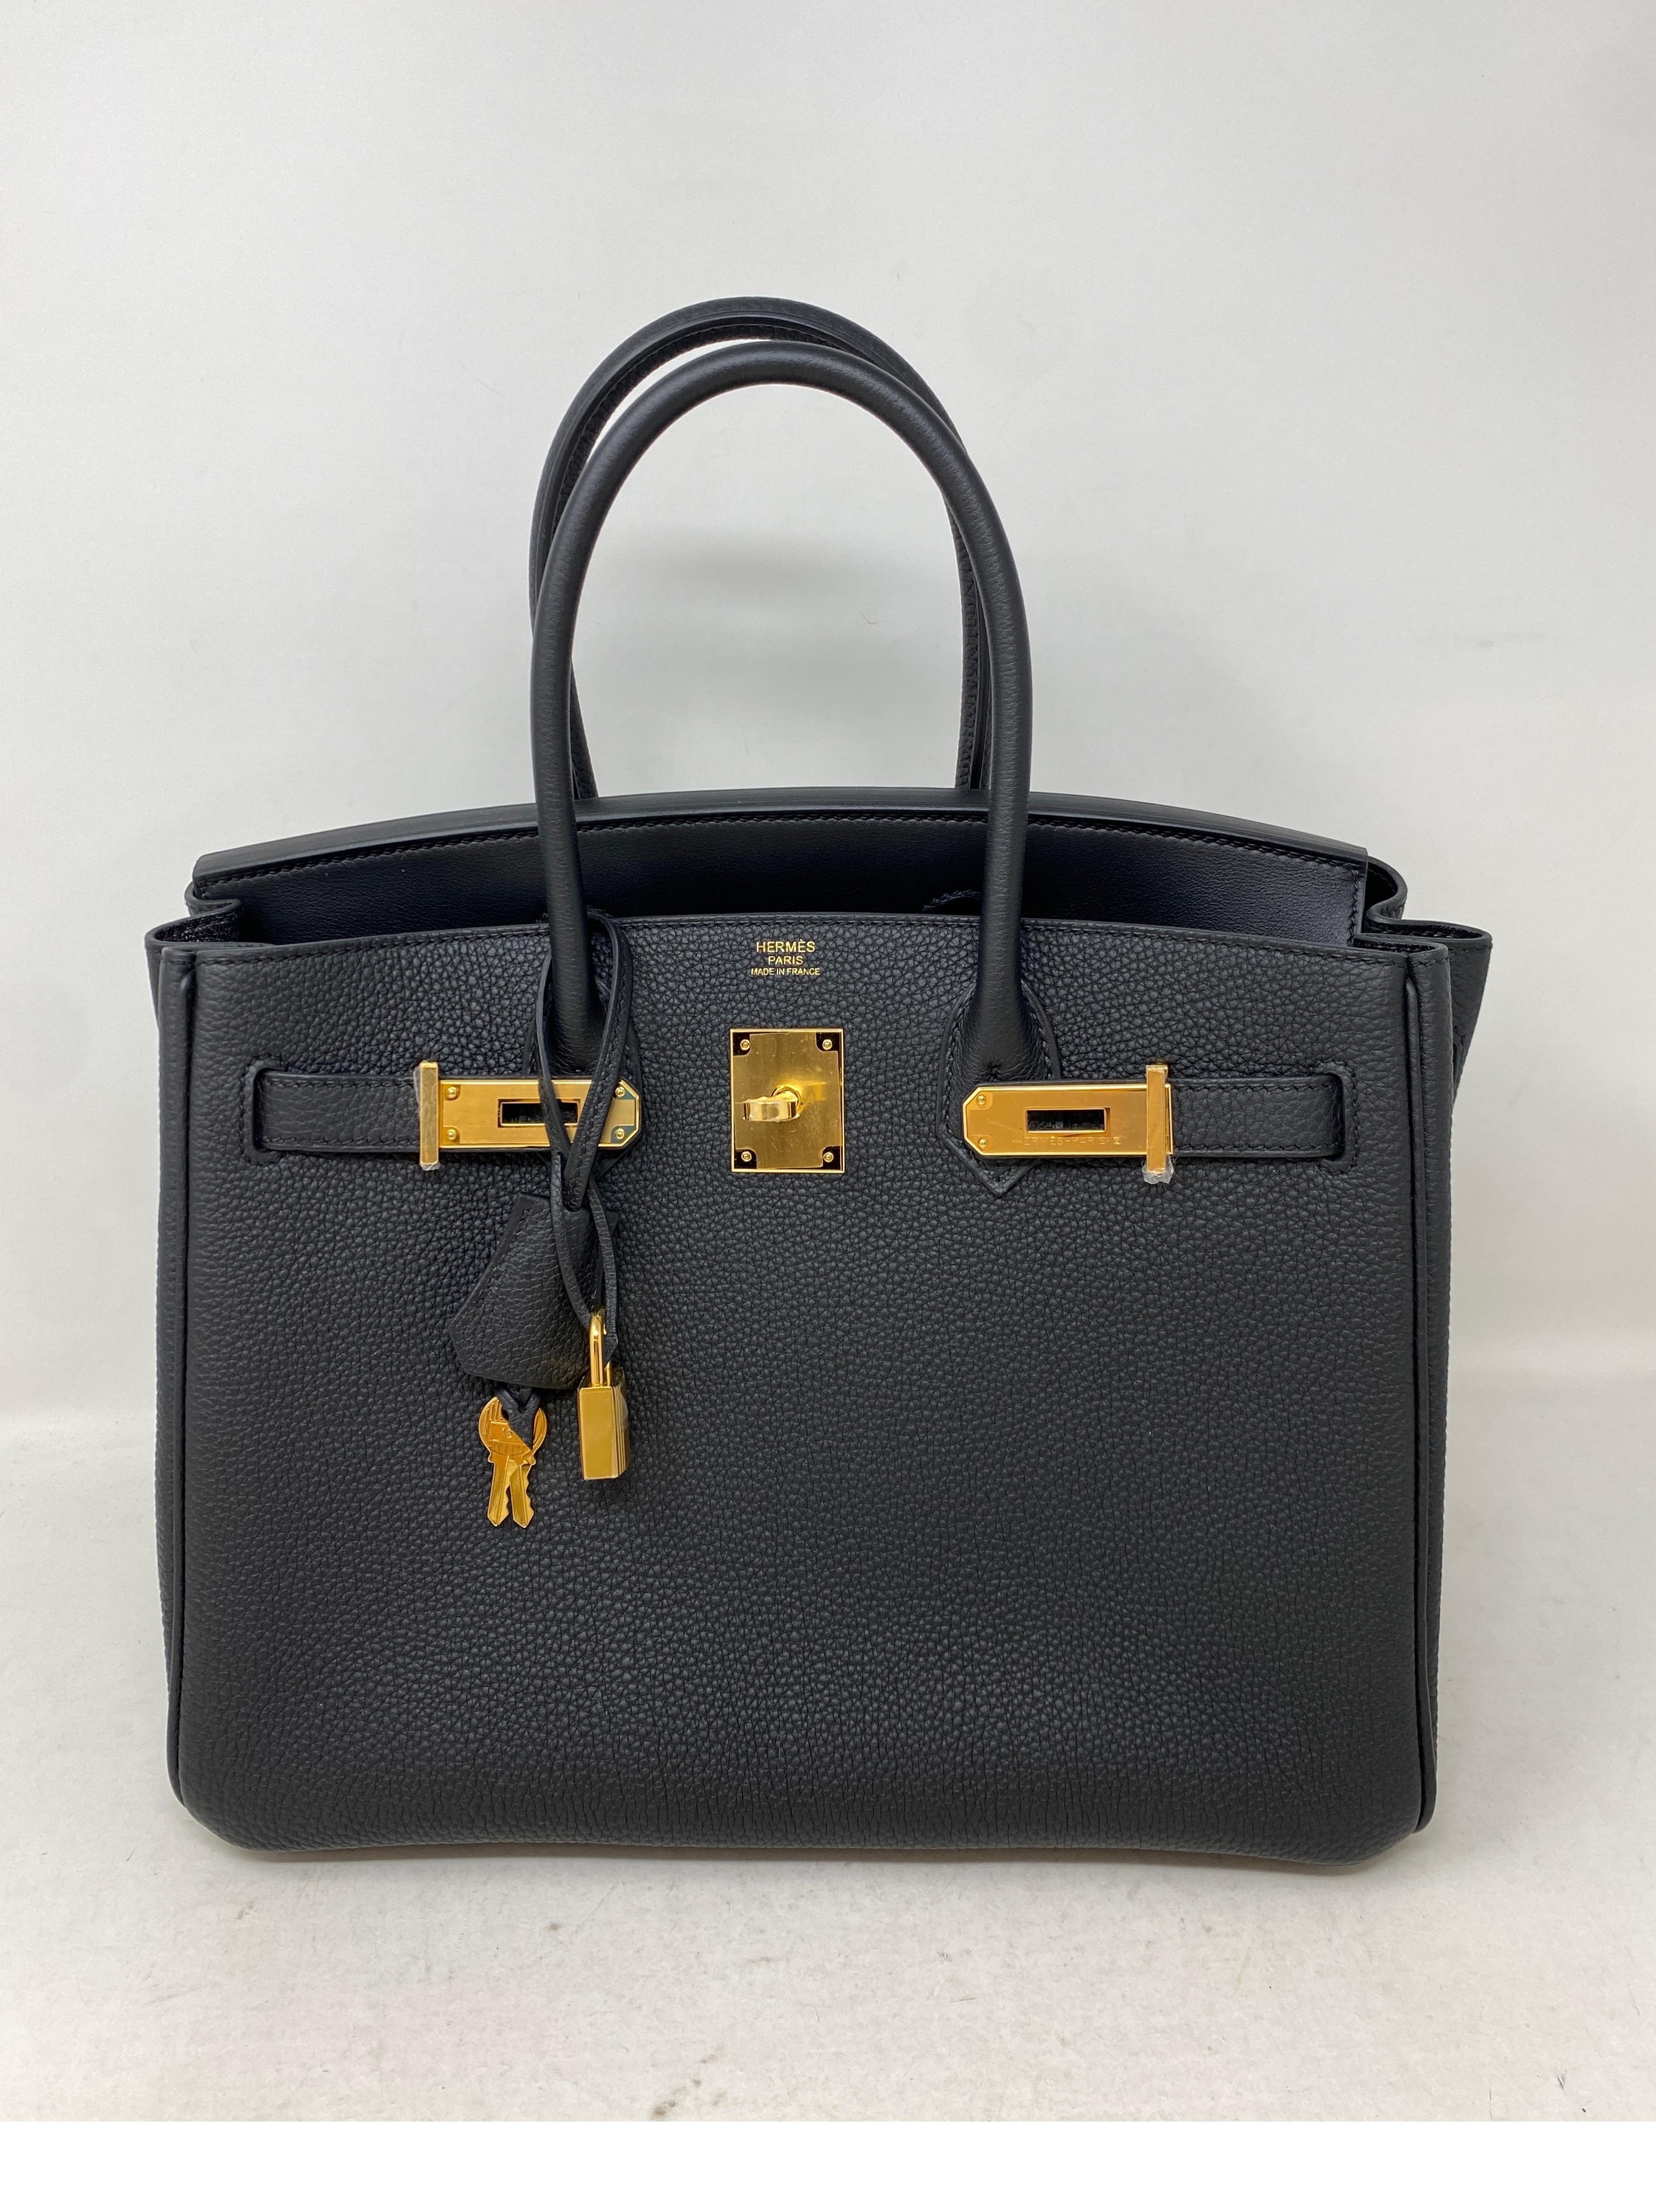 Hermes Black 30 Birkin 3 in 1 Bag. Brand new. Rare and limited. Gorgeous black and gold hardware. Includes middle insert to make this Birkin unique. You can wear it many ways. The insert comes out or can be worn in front side of bag. Insert can also